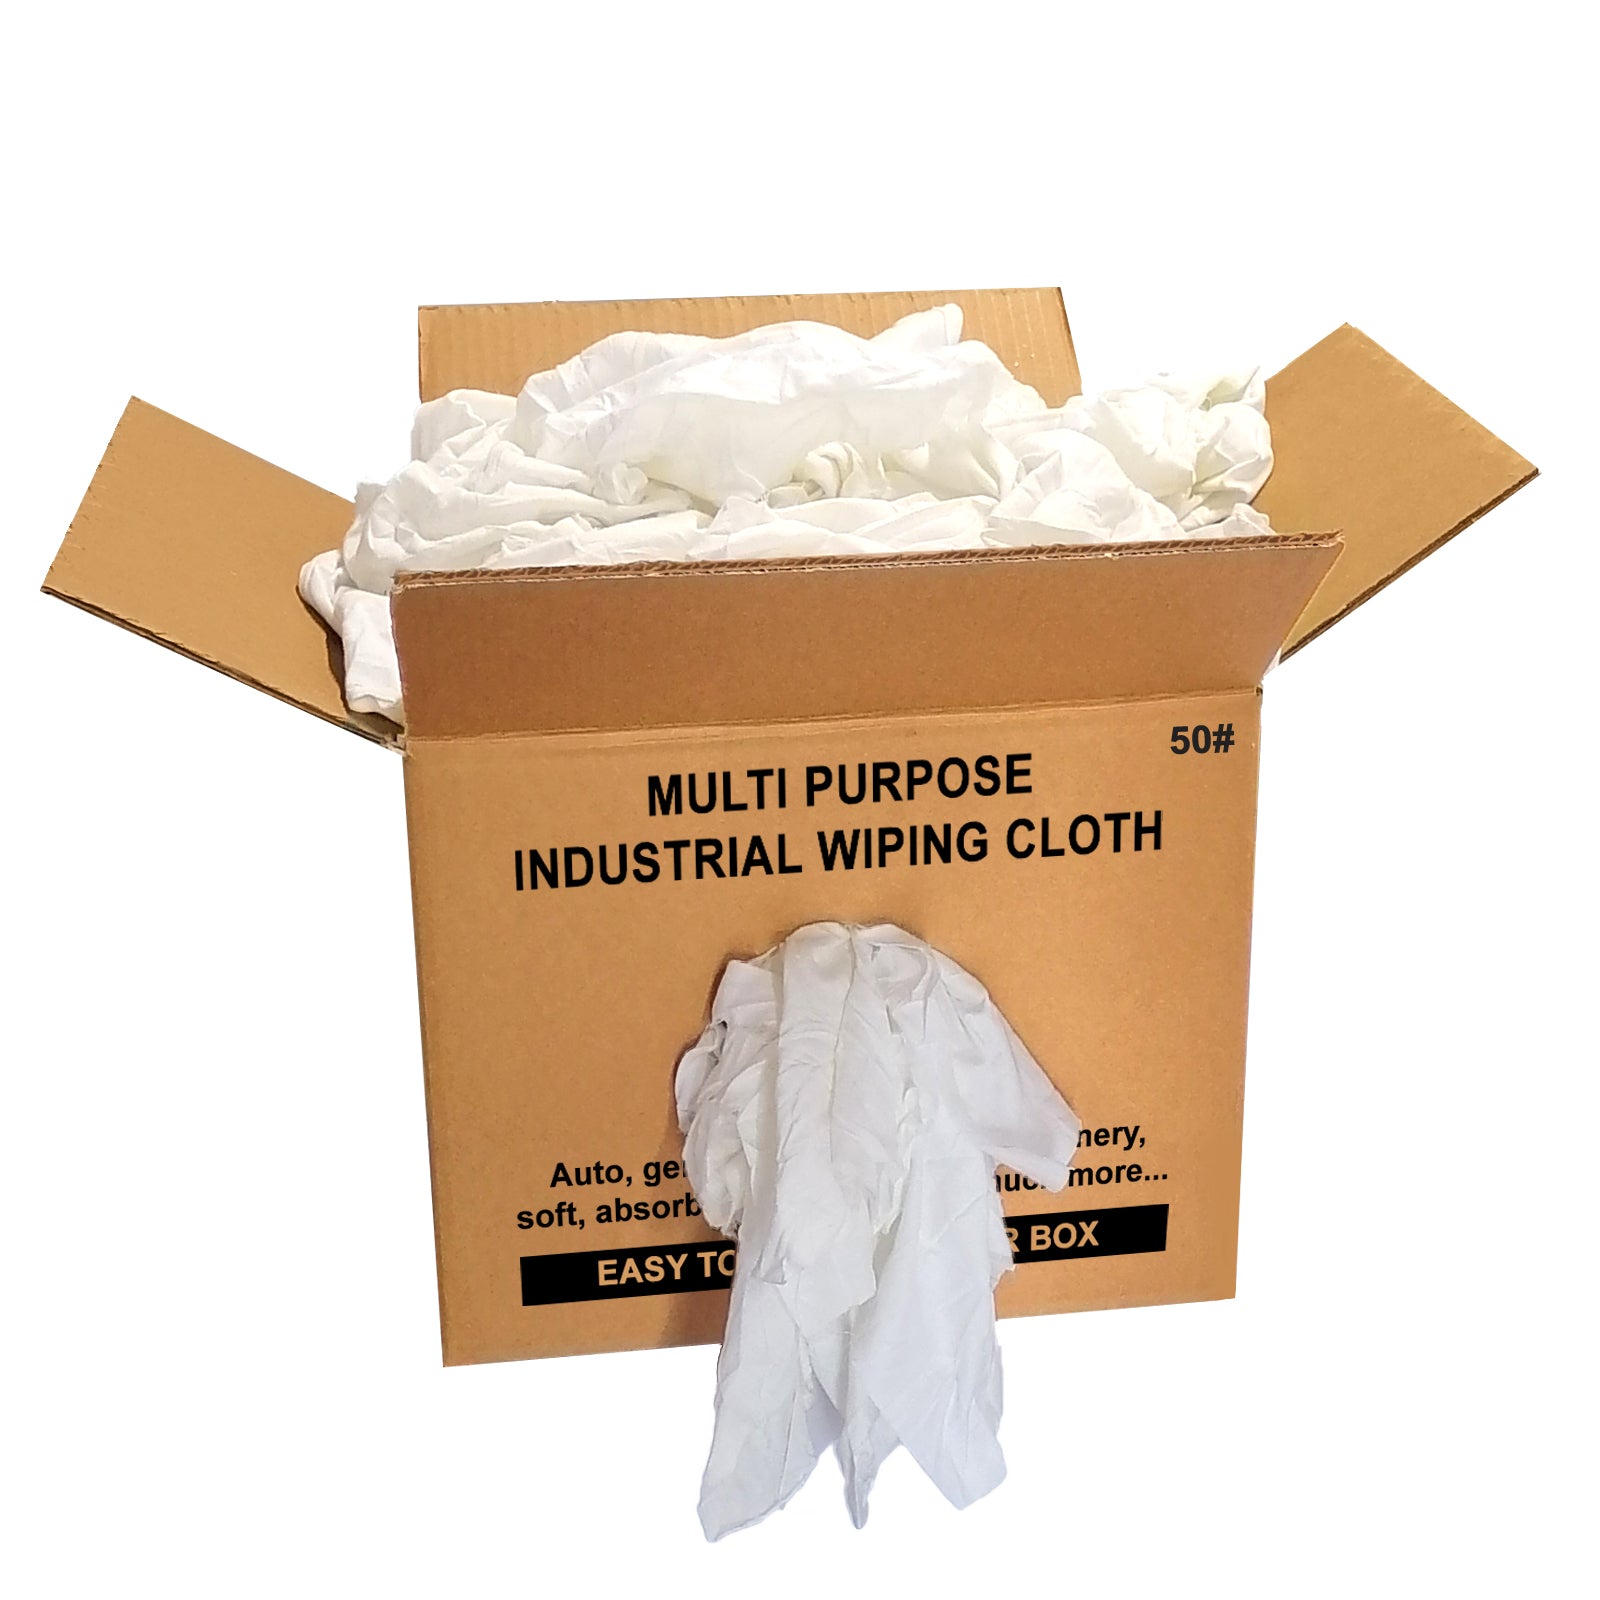 Mixed White Recycled Rags - 50 lbs Box